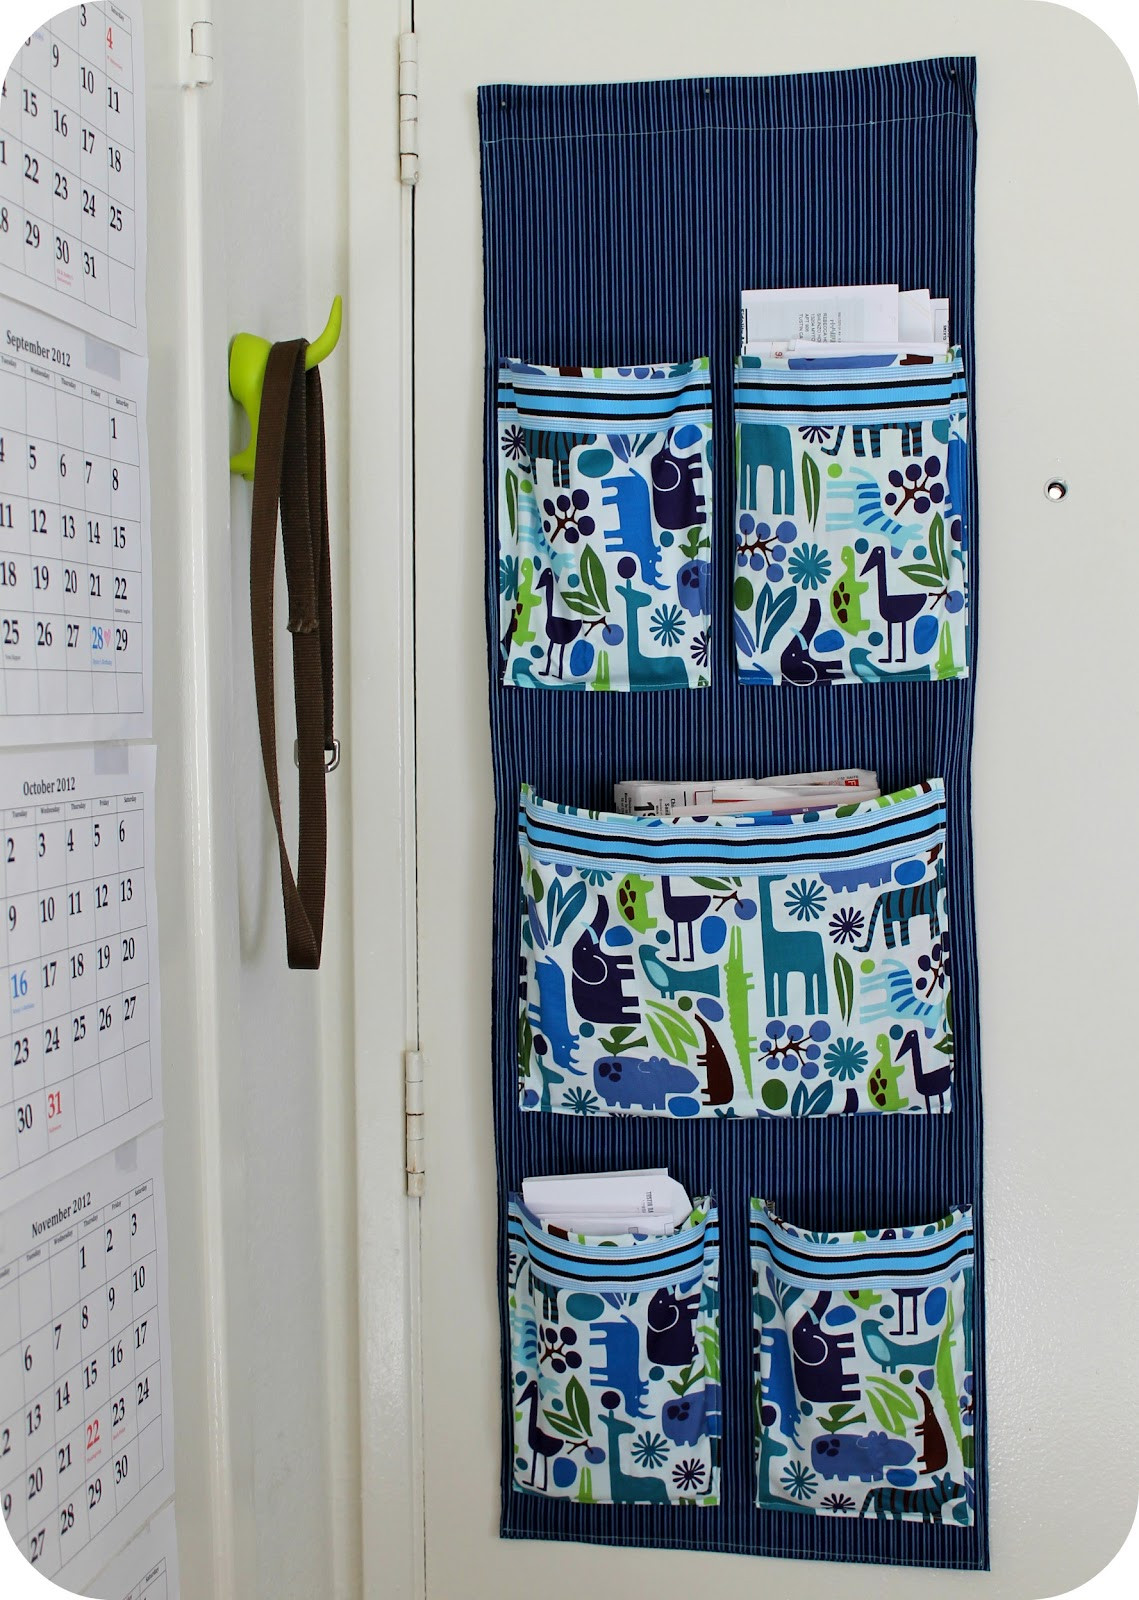 DIY Fabric Organizers
 DiY Project Sew a Fabric Mail Organizer for the Wall